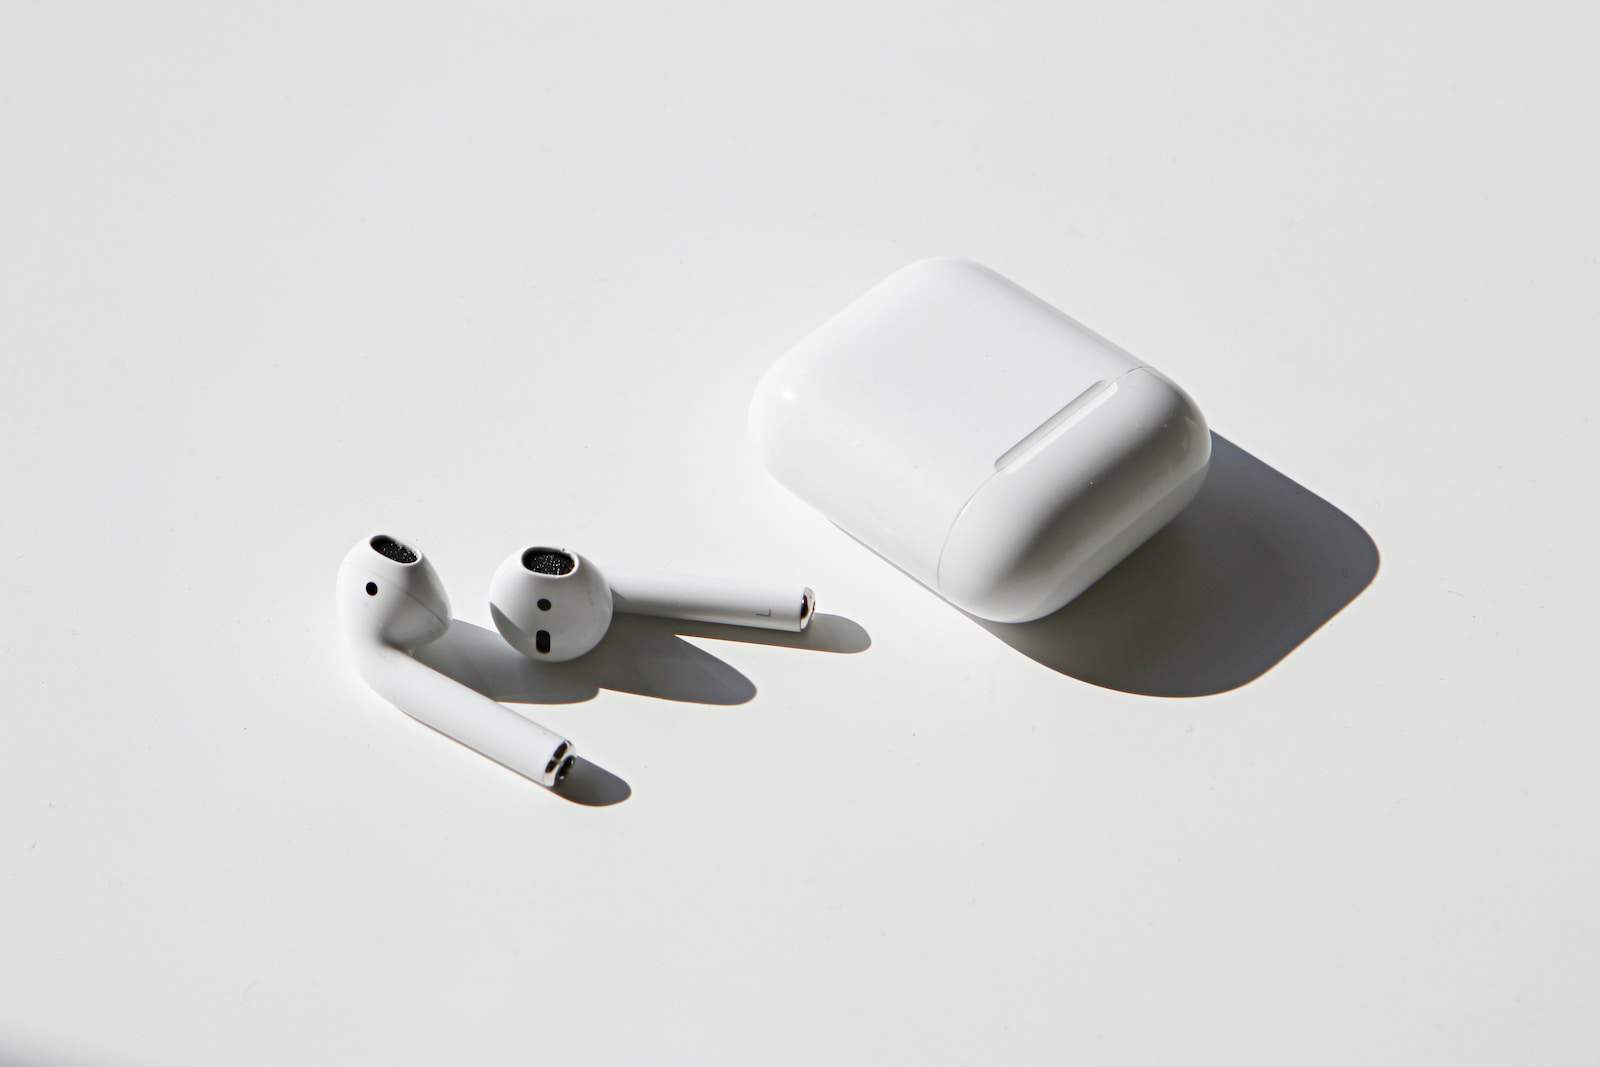 AirPods: How long do they last? Can you extend the lifespan? - SoundGuys